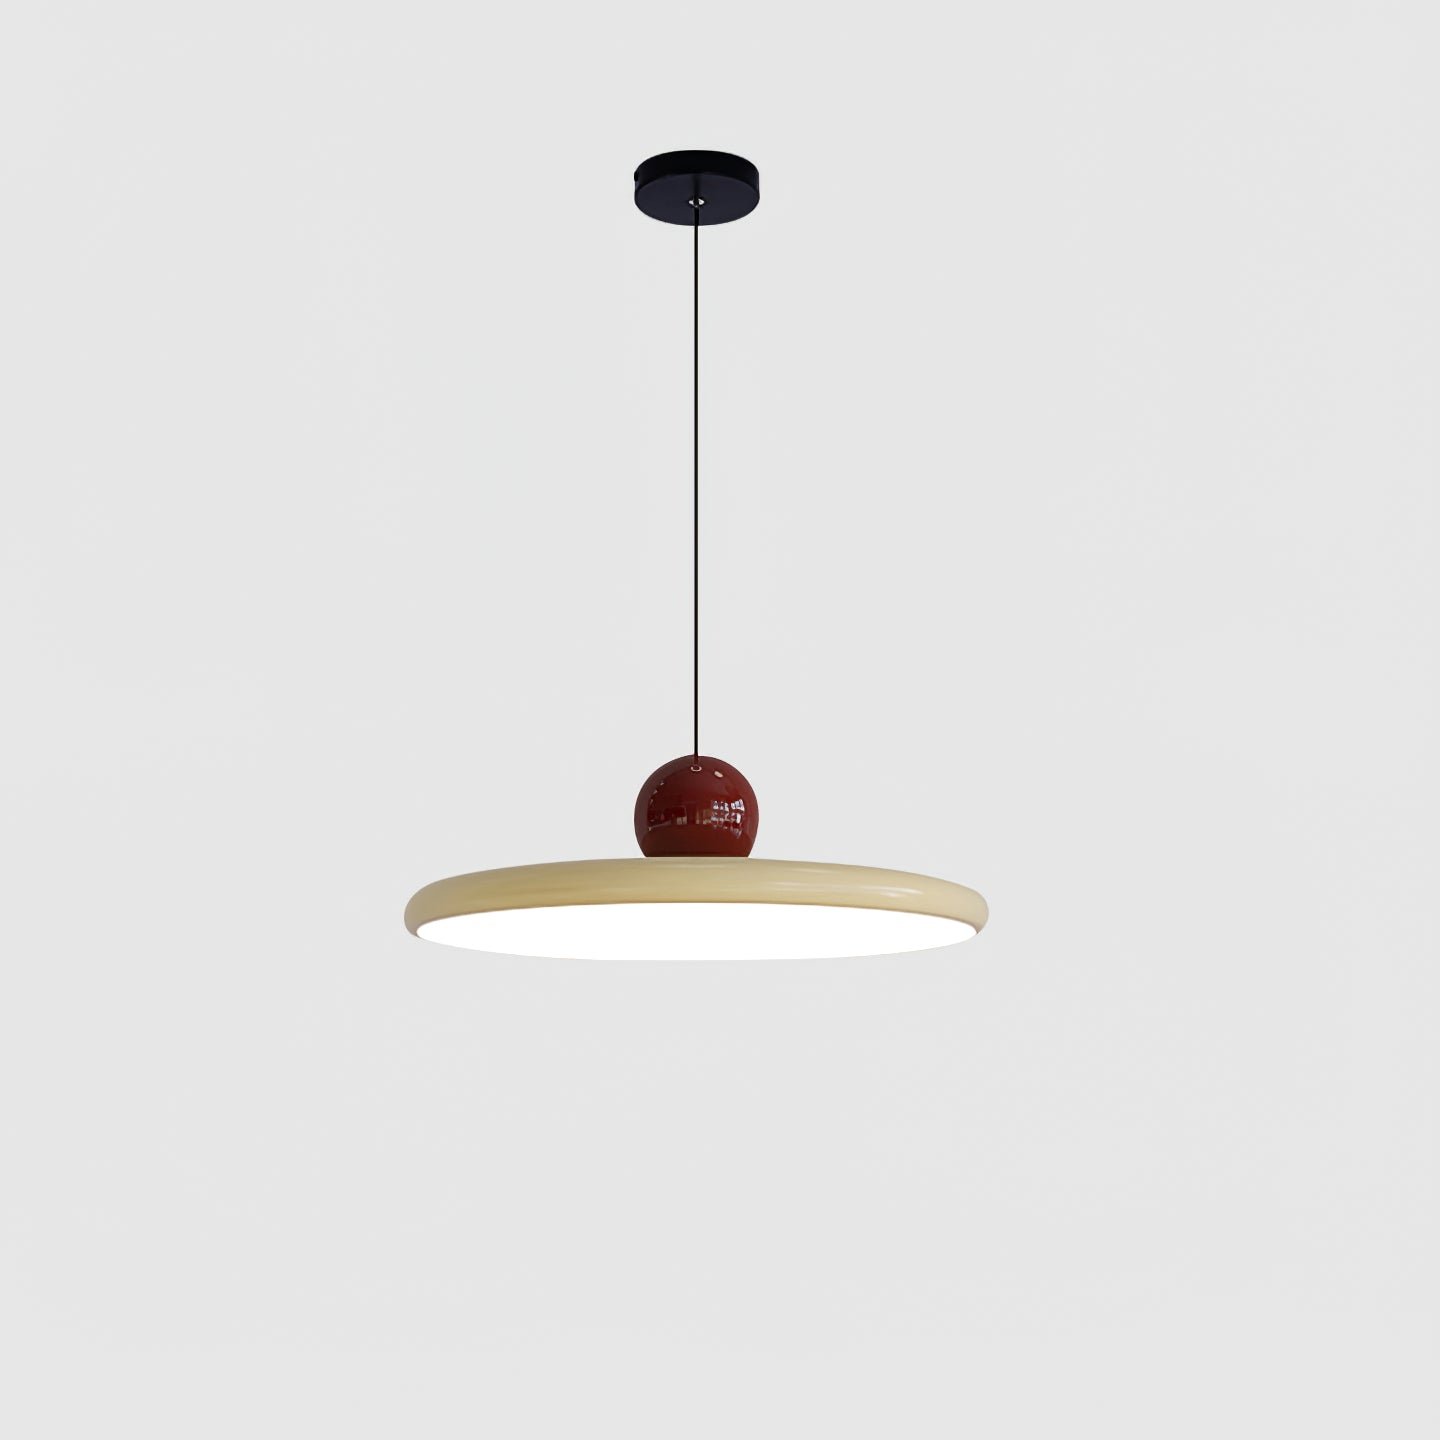 Lola Pendant Lamp in Red or Beige: 19.6 inch Diameter, 4.7 inch Height (50cm x 12cm), Emitting Cool White Light